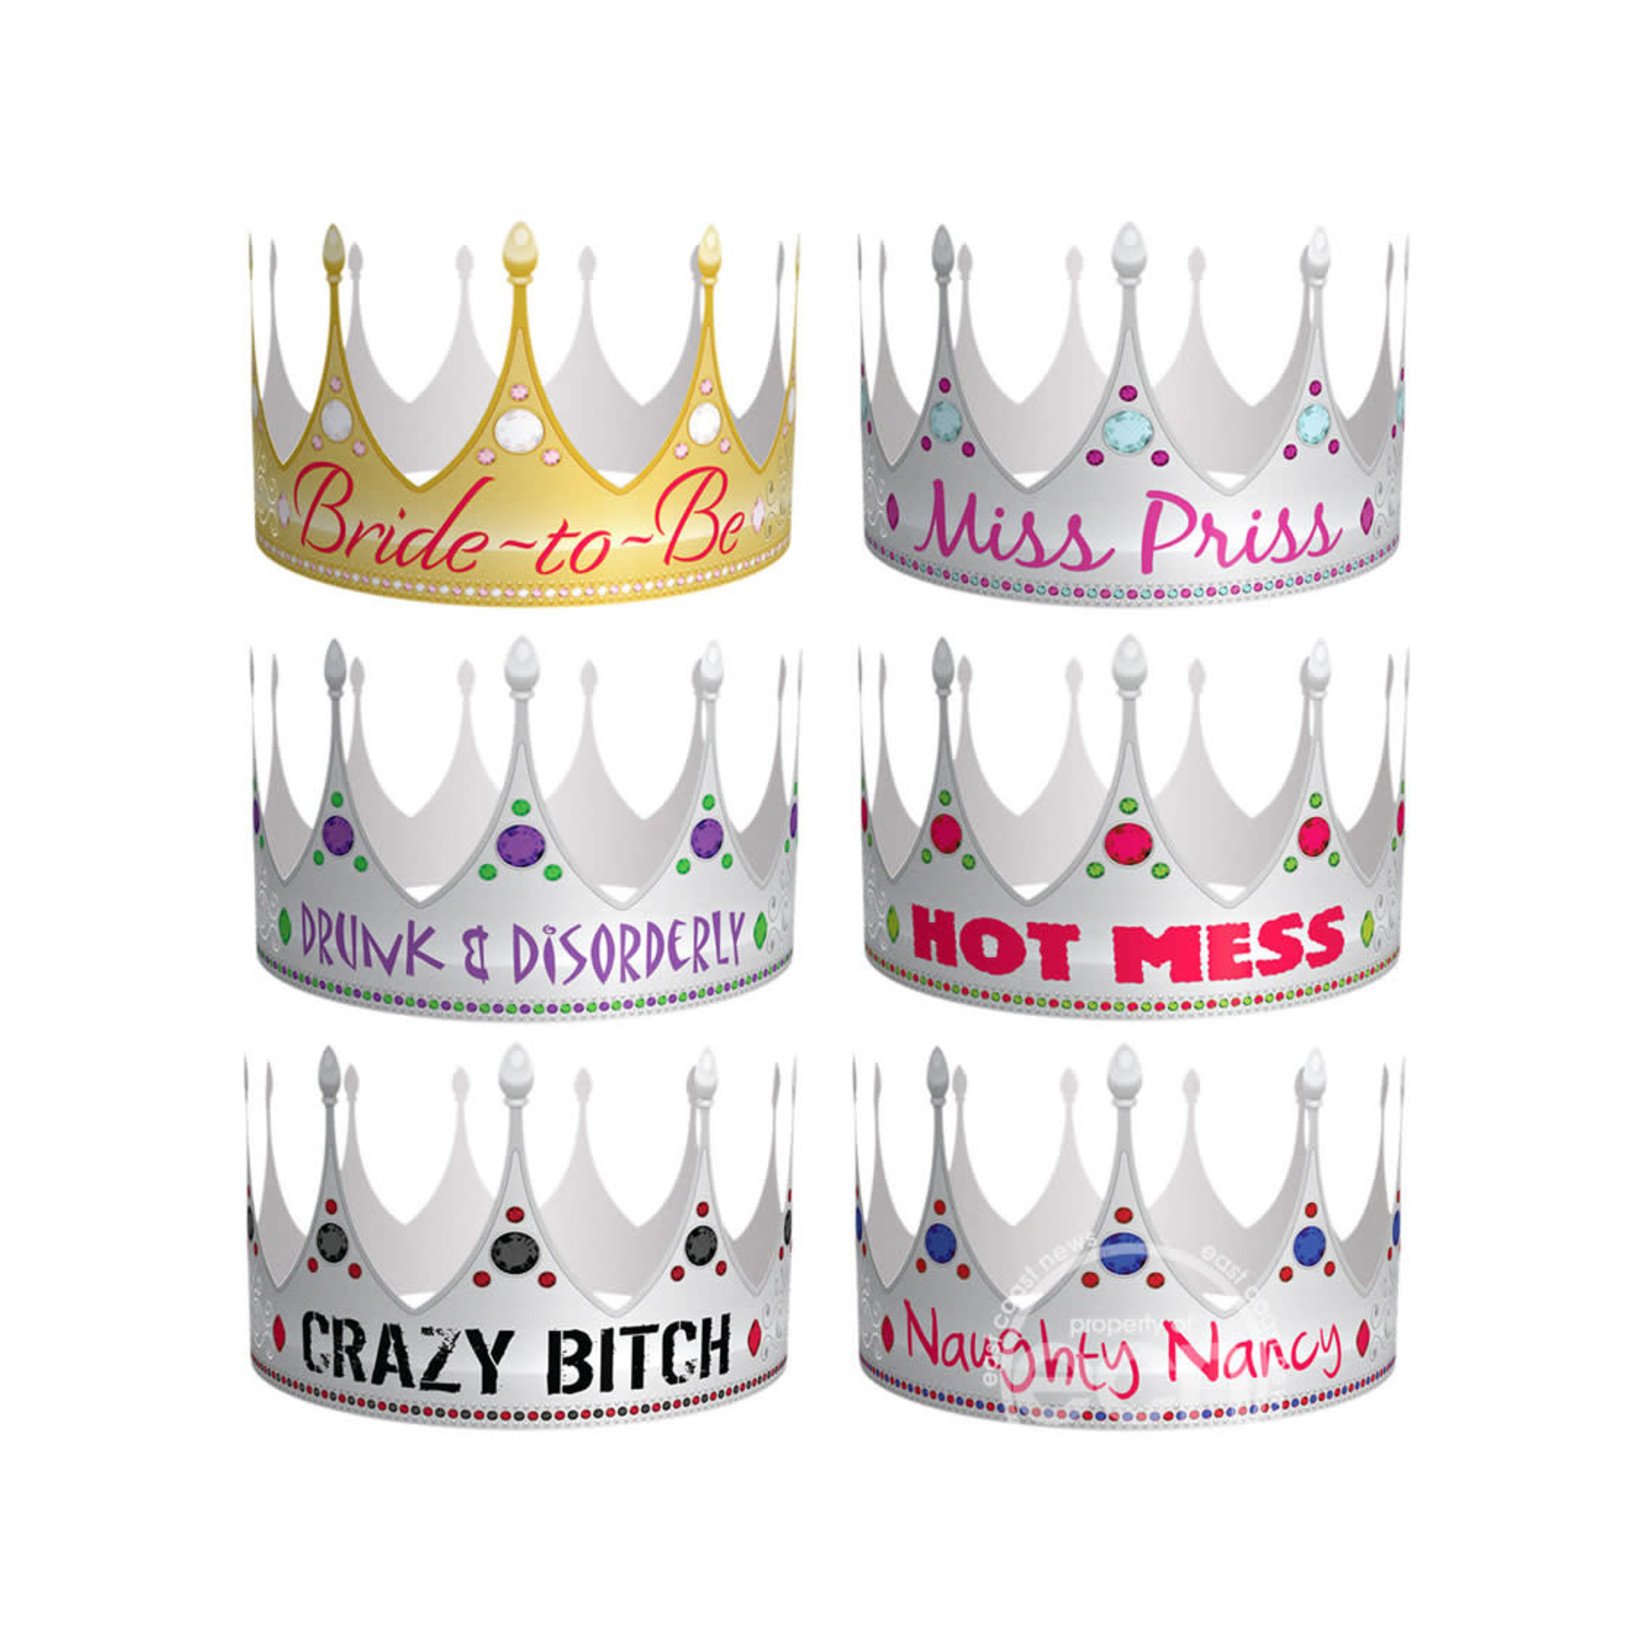 Bride-To-Be's Party Crowns (6 per pack)